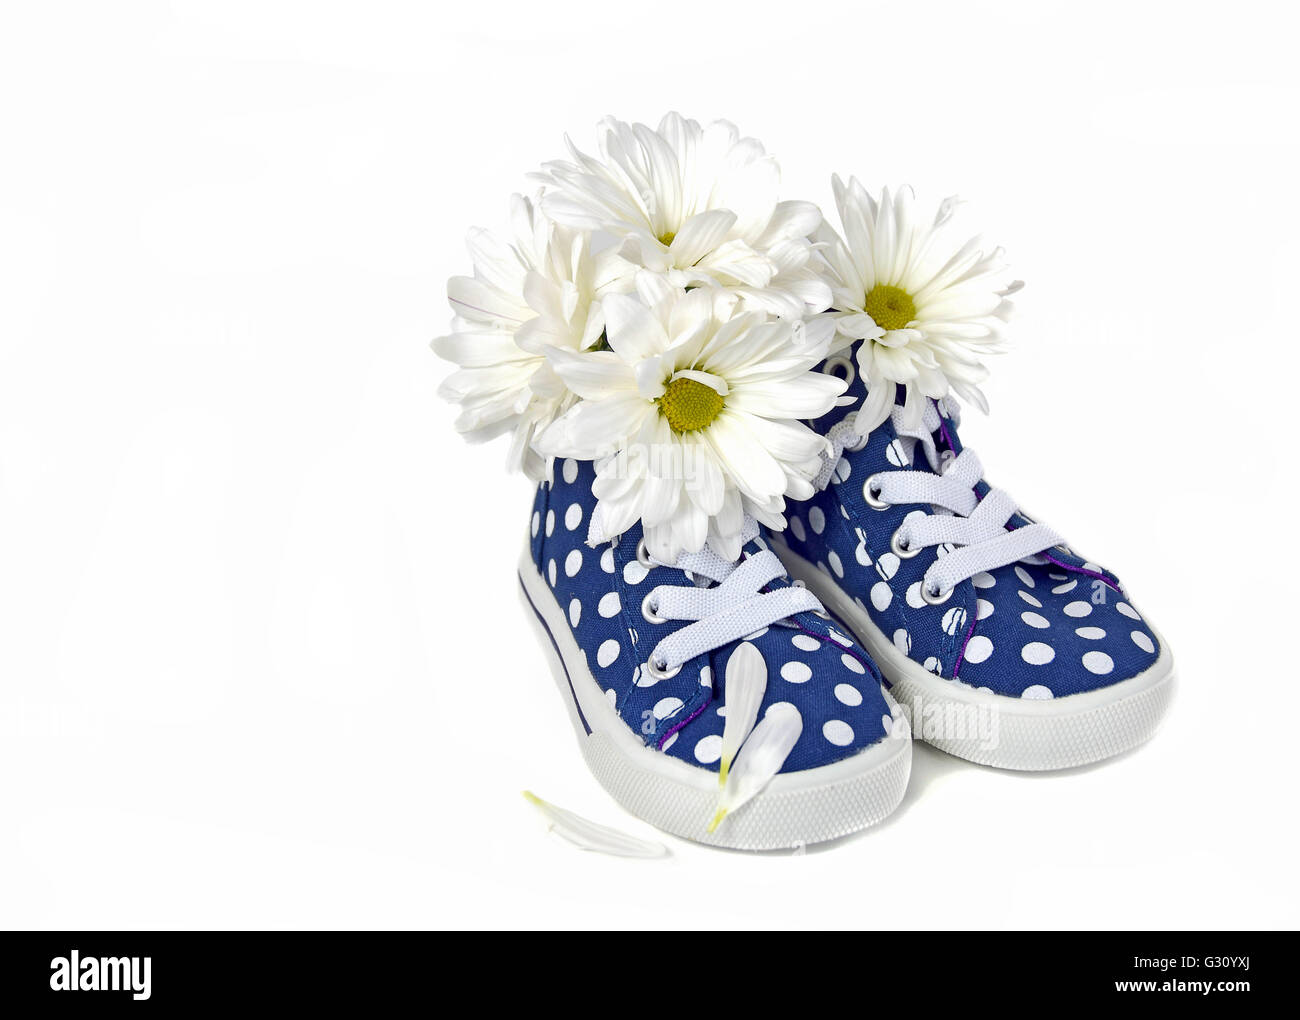 White daisy bouquet in a pair of blue and white polka dot sneakers isolated on white. Stock Photo